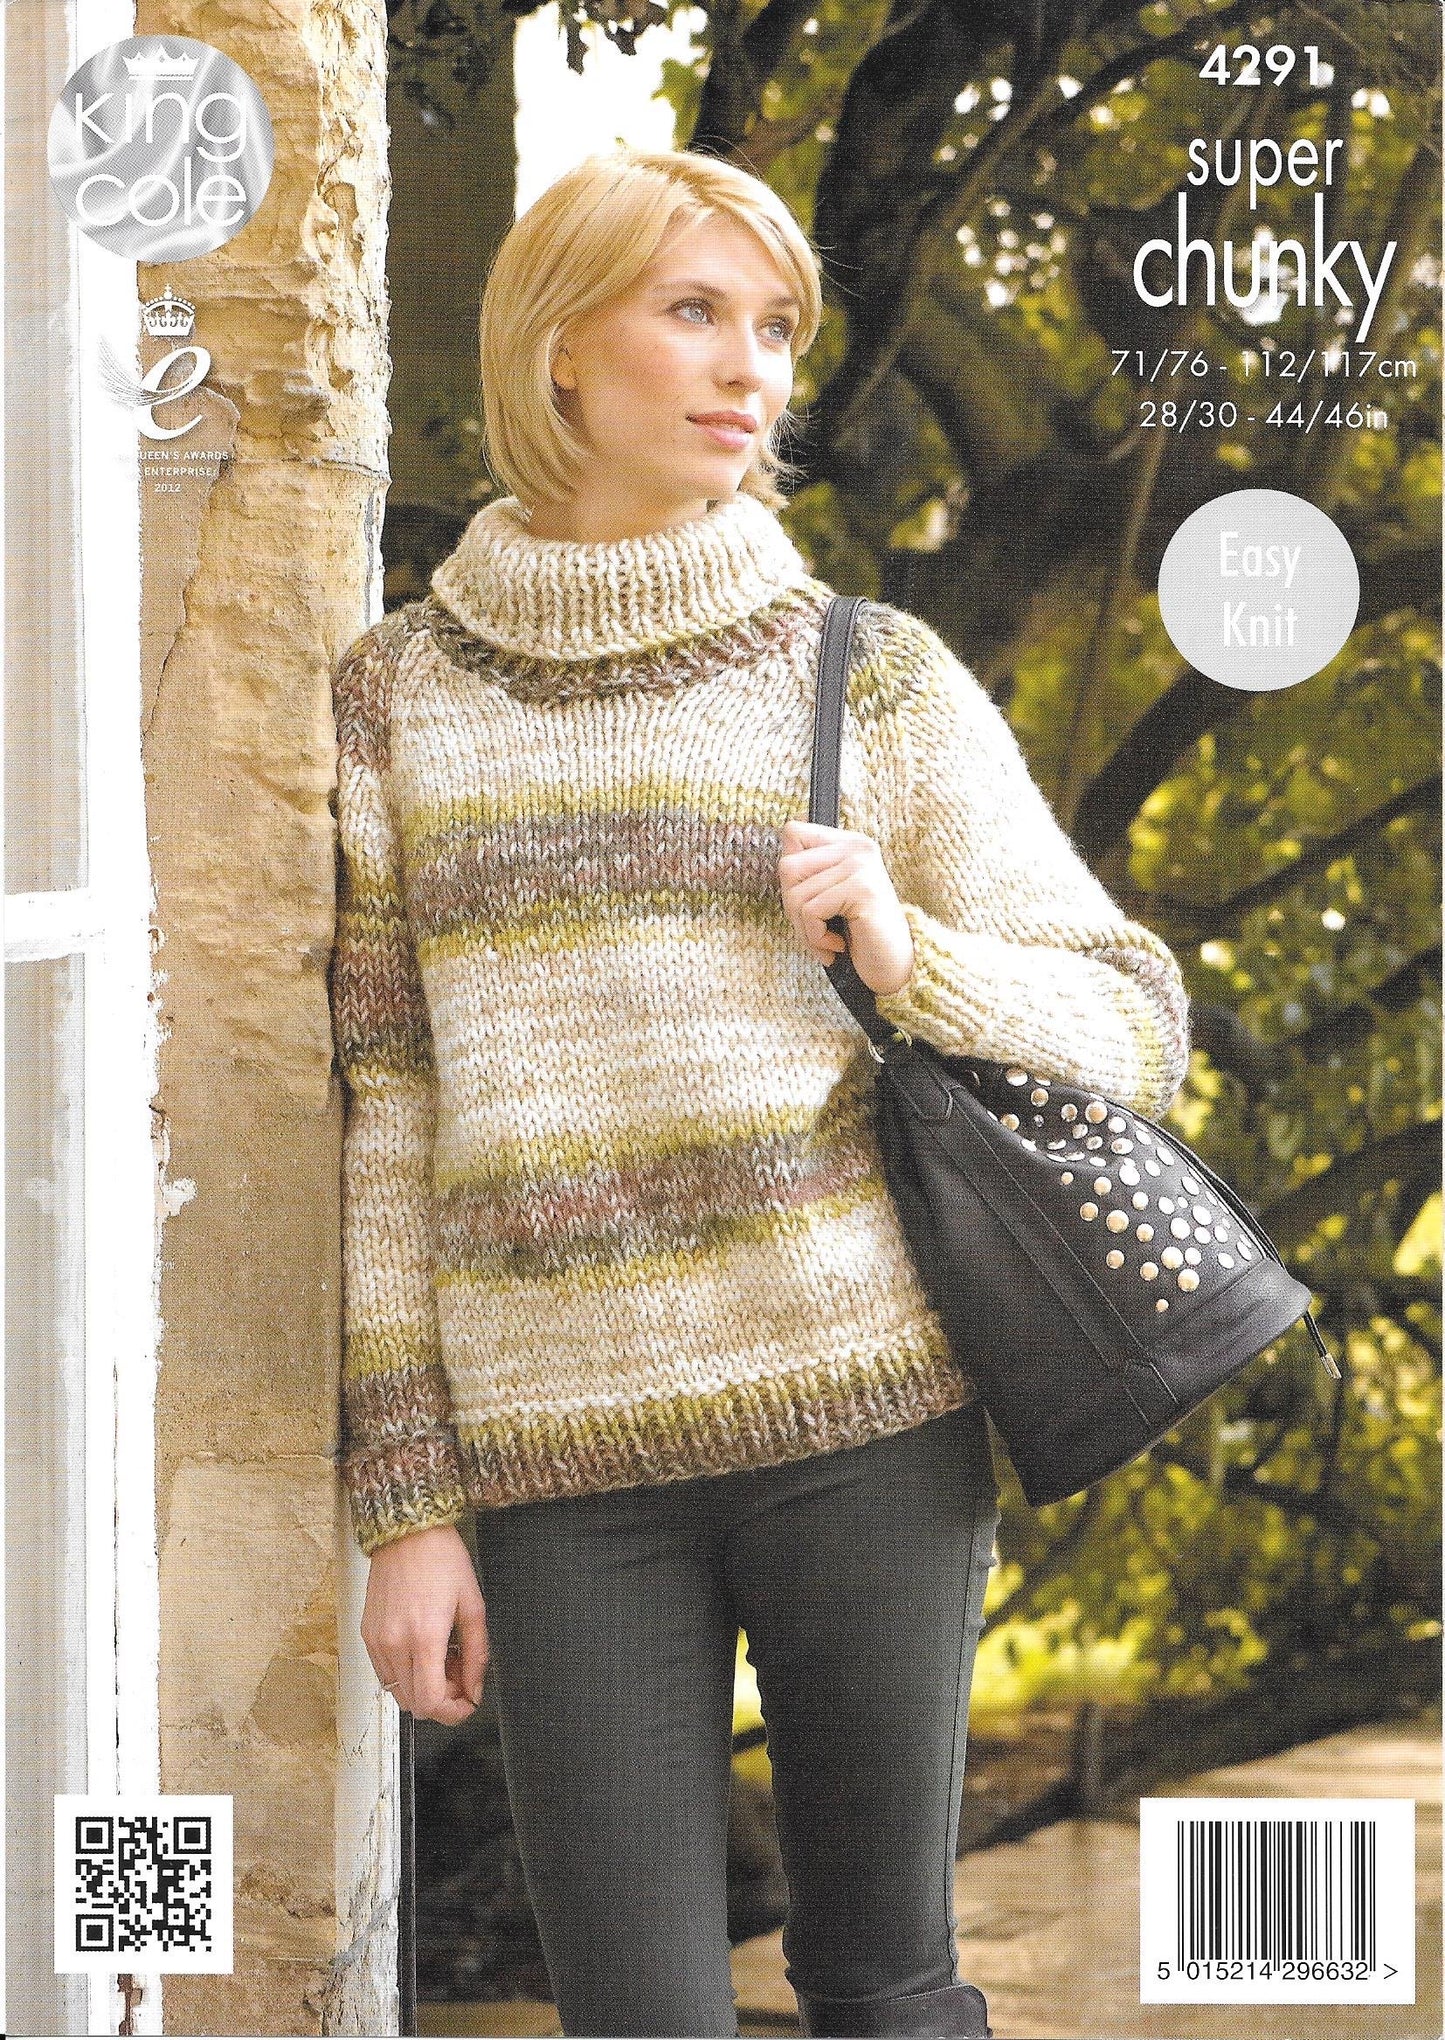 4291 King Cole Big Value Super Chunky Tints ladies cardigan and sweater knitting pattern